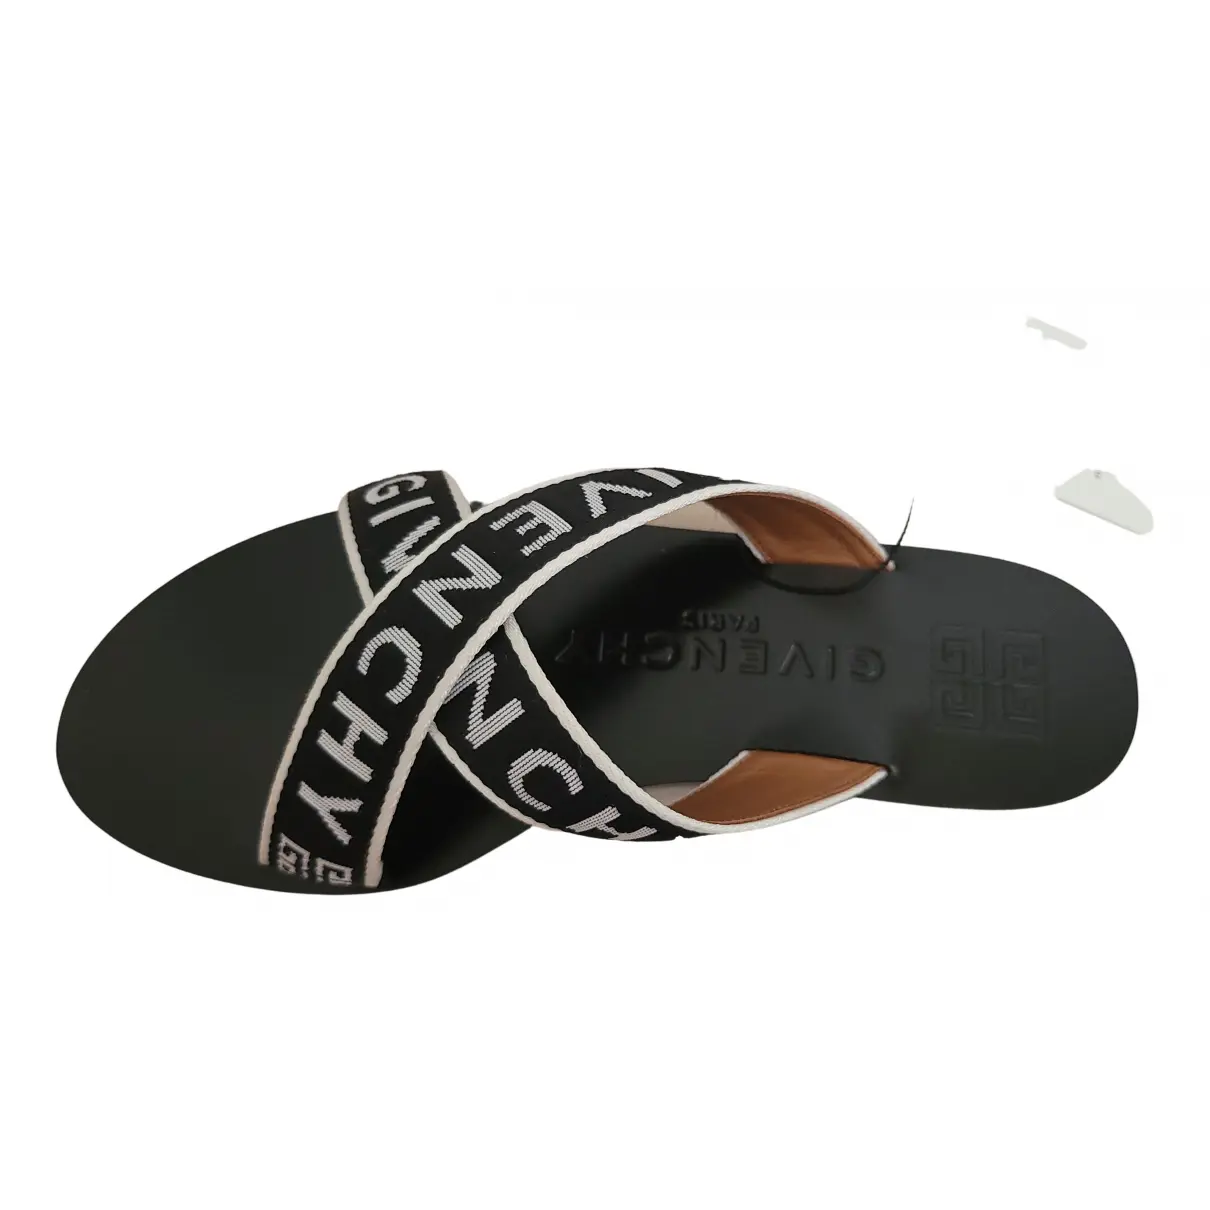 Buy Givenchy Cloth sandals online